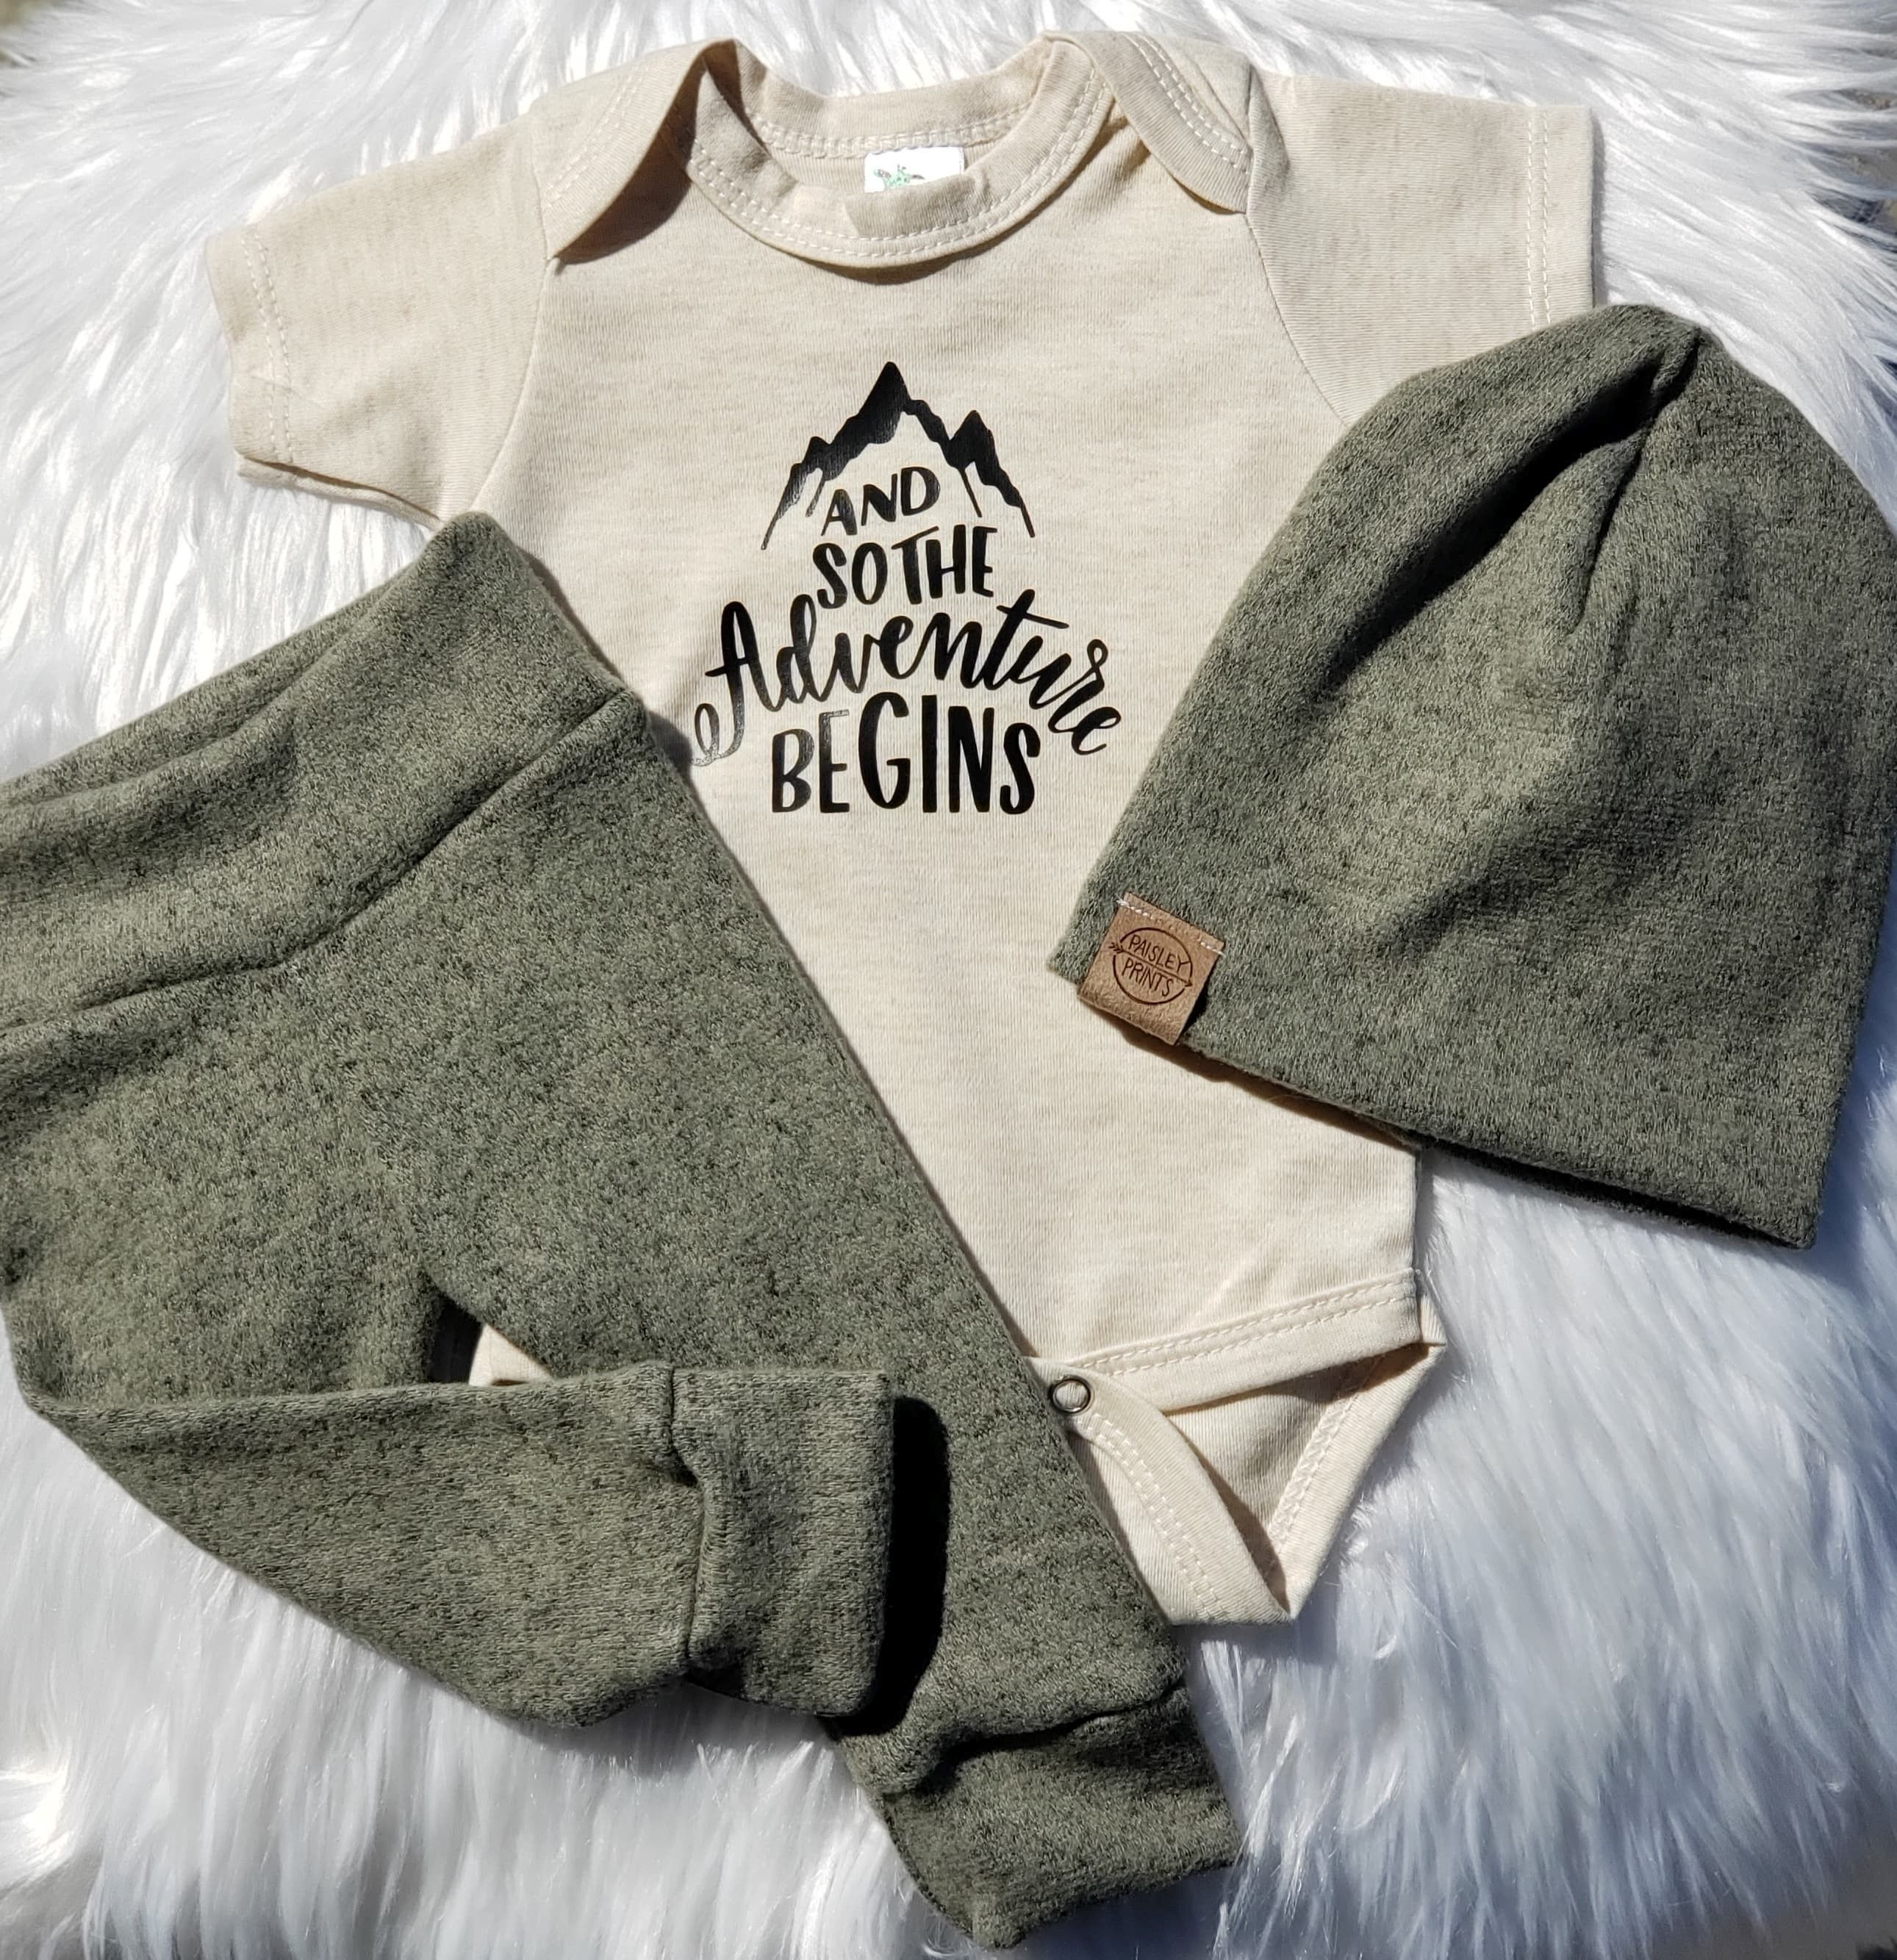 And So The Adventure Begins Onesie | Shop Baby Boutique Outfits That Are Handmade in the USA at SugarBabies! - And So The Adventure Begins Onesie | Shop Baby Boutique Outfits That Are Handmade in the USA at SugarBabies! -   19 style Boy girl ideas